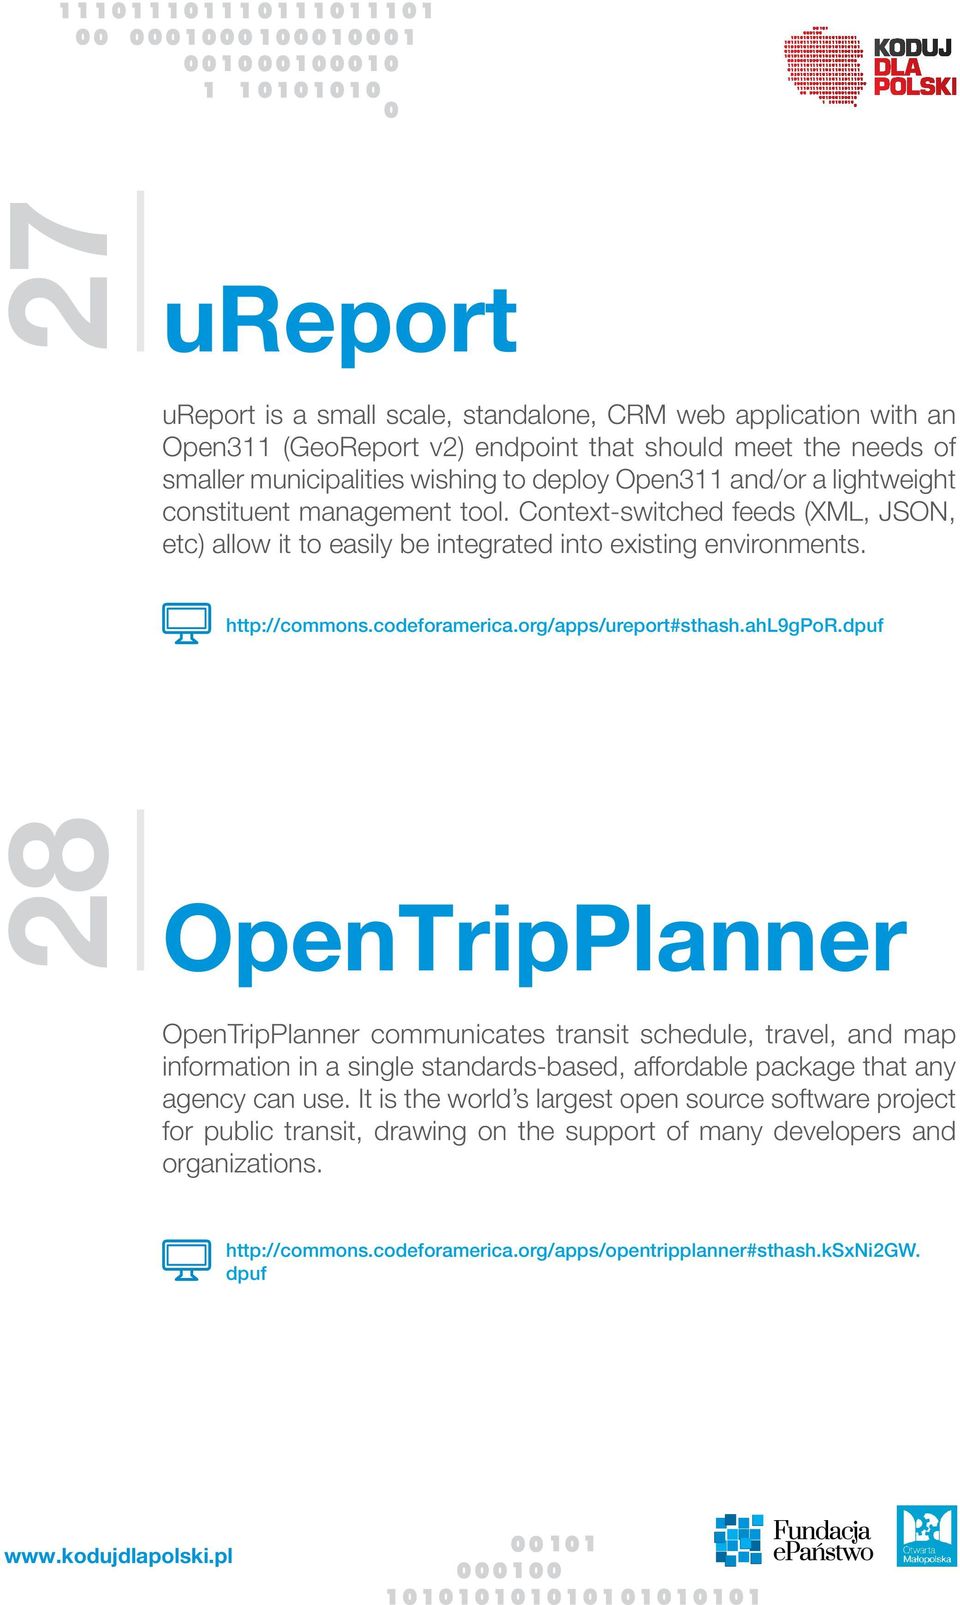 ahl9gpor.dpuf 28 OpenTripPlanner OpenTripPlanner communicates transit schedule, travel, and map information in a single standards-based, affordable package that any agency can use.